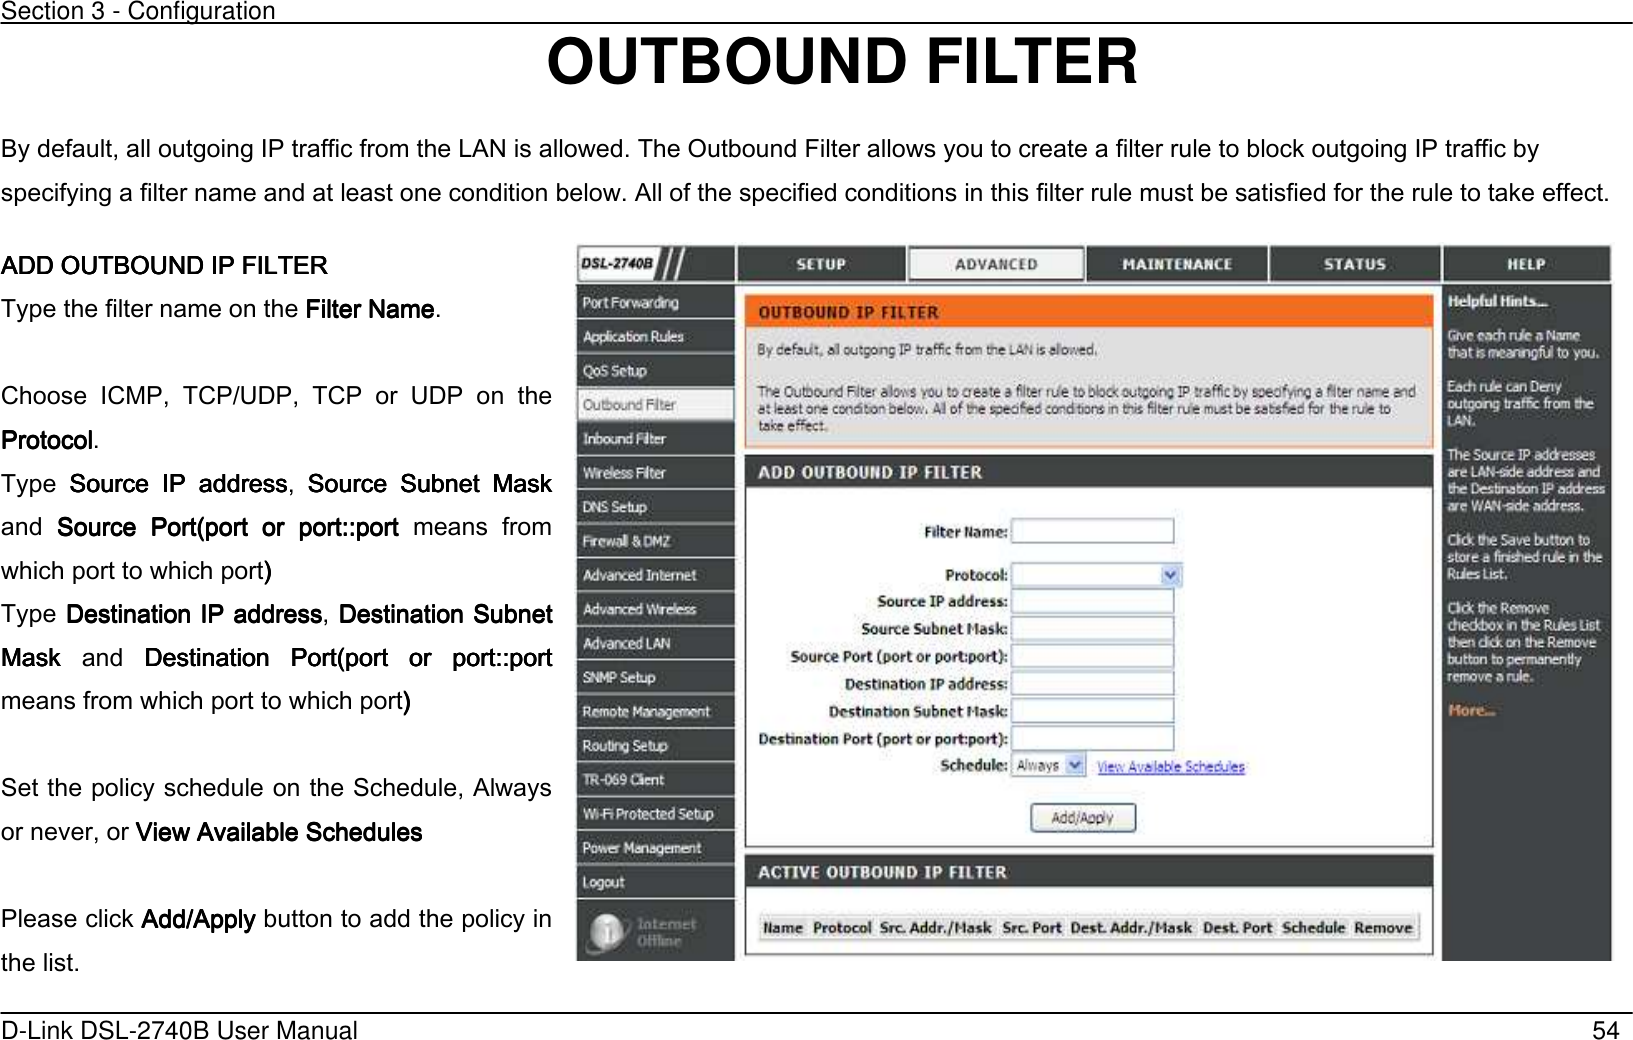 Section 3 - Configuration   D-Link DSL-2740B User Manual                                                  54 OUTBOUND FILTER By default, all outgoing IP traffic from the LAN is allowed. The Outbound Filter allows you to create a filter rule to block outgoing IP traffic by specifying a filter name and at least one condition below. All of the specified conditions in this filter rule must be satisfied for the rule to take effect. AAAADD OUTBOUND IP FILTERDD OUTBOUND IP FILTERDD OUTBOUND IP FILTERDD OUTBOUND IP FILTER    Type the filter name on the Filter NameFilter NameFilter NameFilter Name.  Choose  ICMP,  TCP/UDP,  TCP  or  UDP  on  the ProtocolProtocolProtocolProtocol. Type  Source  IP  addressSource  IP  addressSource  IP  addressSource  IP  address,  Source  Subnet  Mask Source  Subnet  Mask Source  Subnet  Mask Source  Subnet  Mask and  Source  PortSource  PortSource  PortSource  Port(port  or (port  or (port  or (port  or  port:port:port:port:::::portportportport  means  from which port to which port’ ’ ’ ’      Type DestinationDestinationDestinationDestination IP address IP address IP address IP address, DestinationDestinationDestinationDestination Subnet  Subnet  Subnet  Subnet Mask Mask Mask Mask  and  DestinationDestinationDestinationDestination  Port(po  Port(po  Port(po  Port(port  or rt  or rt  or rt  or  port:port:port:port:::::portportportport means from which port to which port’’’’        Set the policy schedule on the Schedule, Always or never, or View Available SchedulesView Available SchedulesView Available SchedulesView Available Schedules        Please click Add/ApplyAdd/ApplyAdd/ApplyAdd/Apply button to add the policy in the list.  